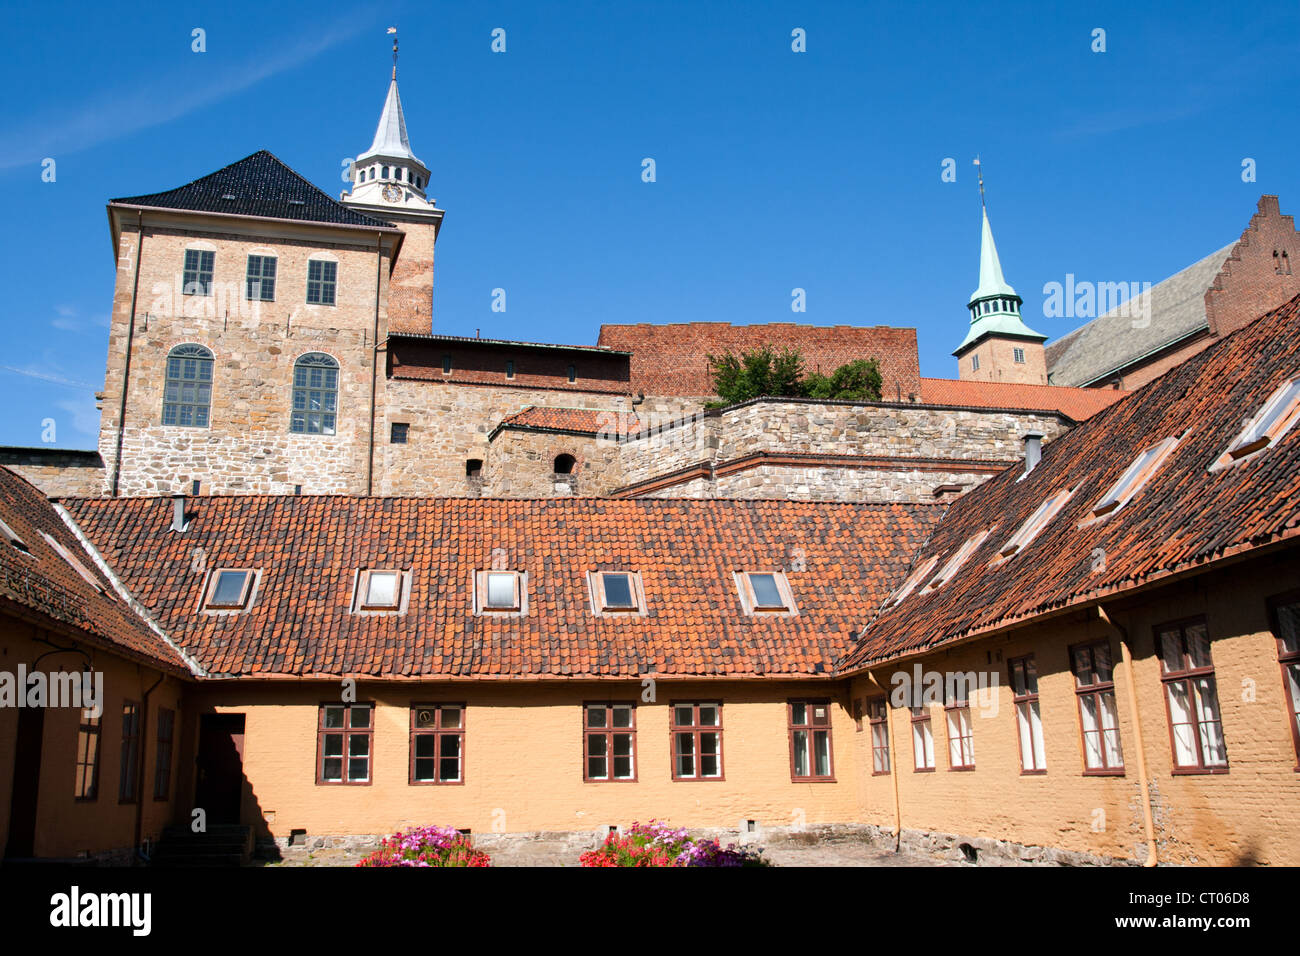 Medieval castle Akershus Fortress in Oslo Stock Photo